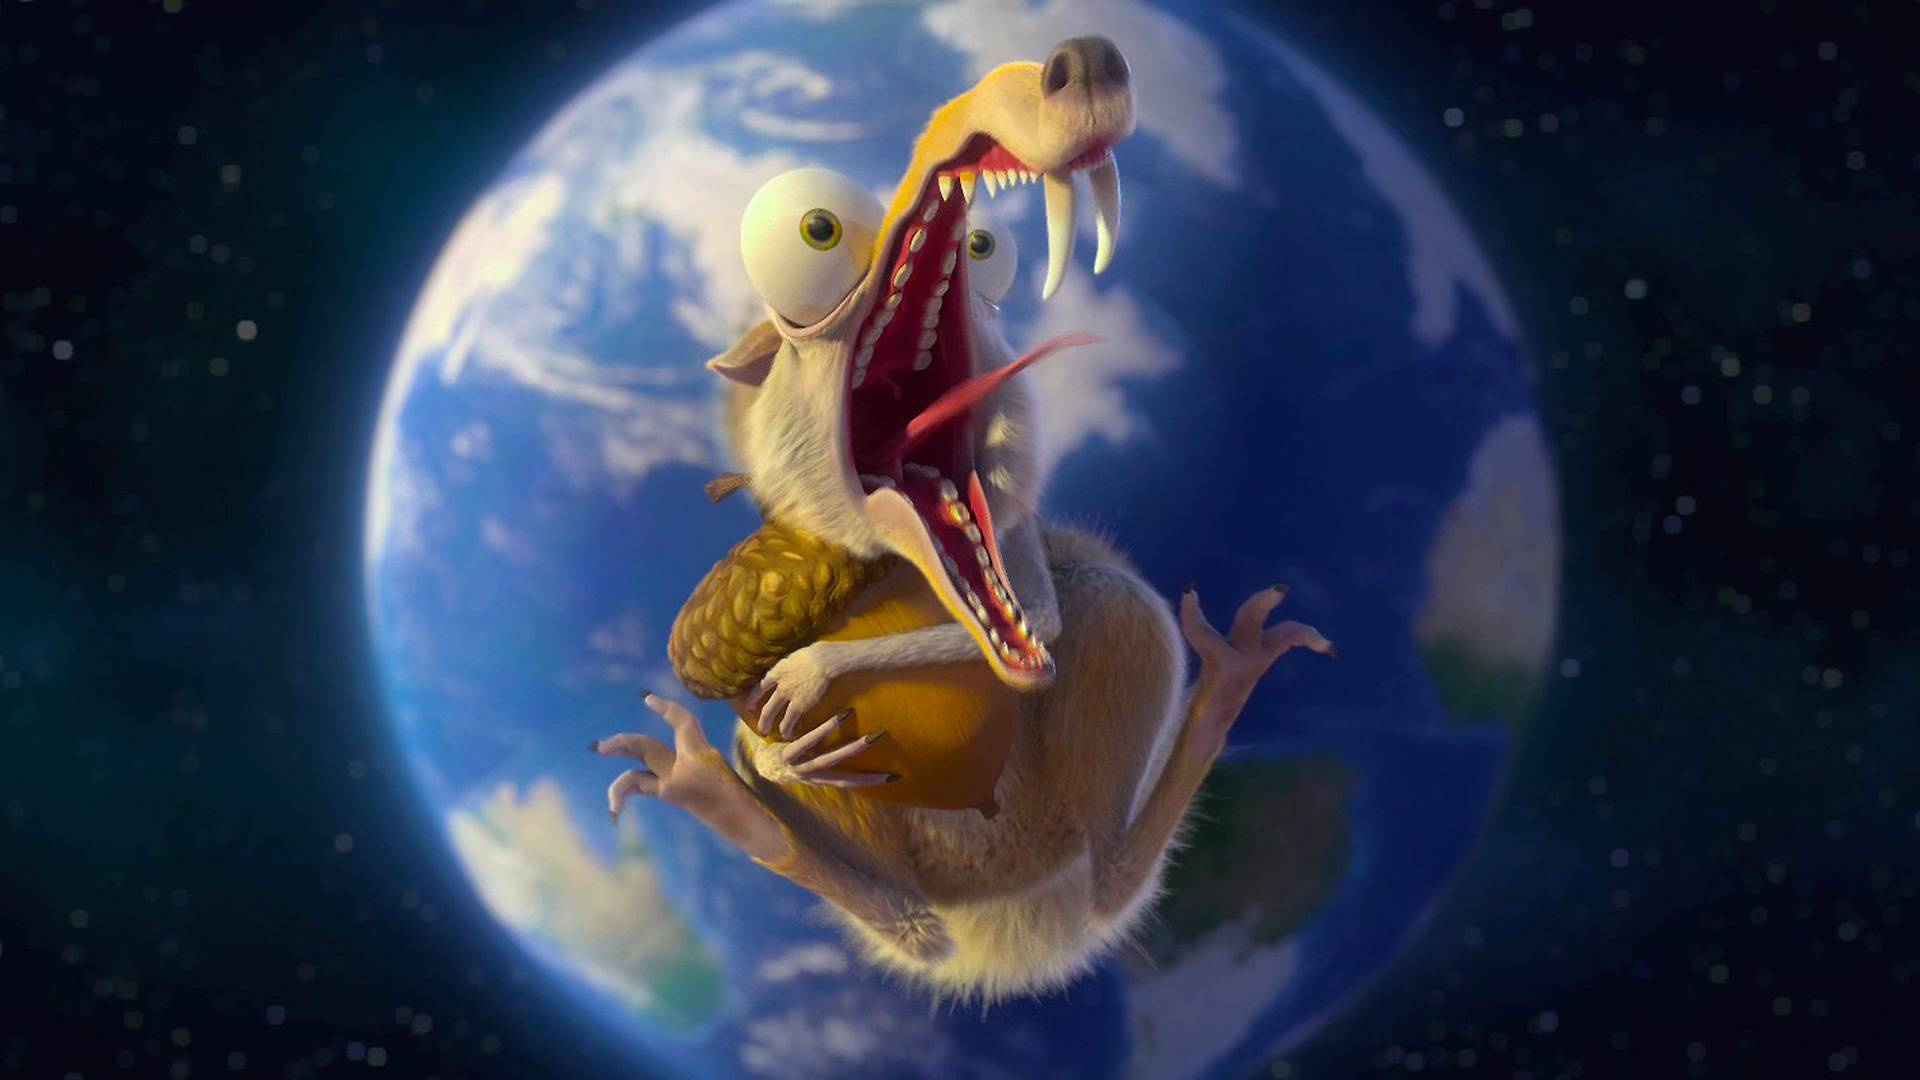 Ice Age 5 animated movie, Fun-filled adventures, Beloved characters, Witty humor, 1920x1080 Full HD Desktop